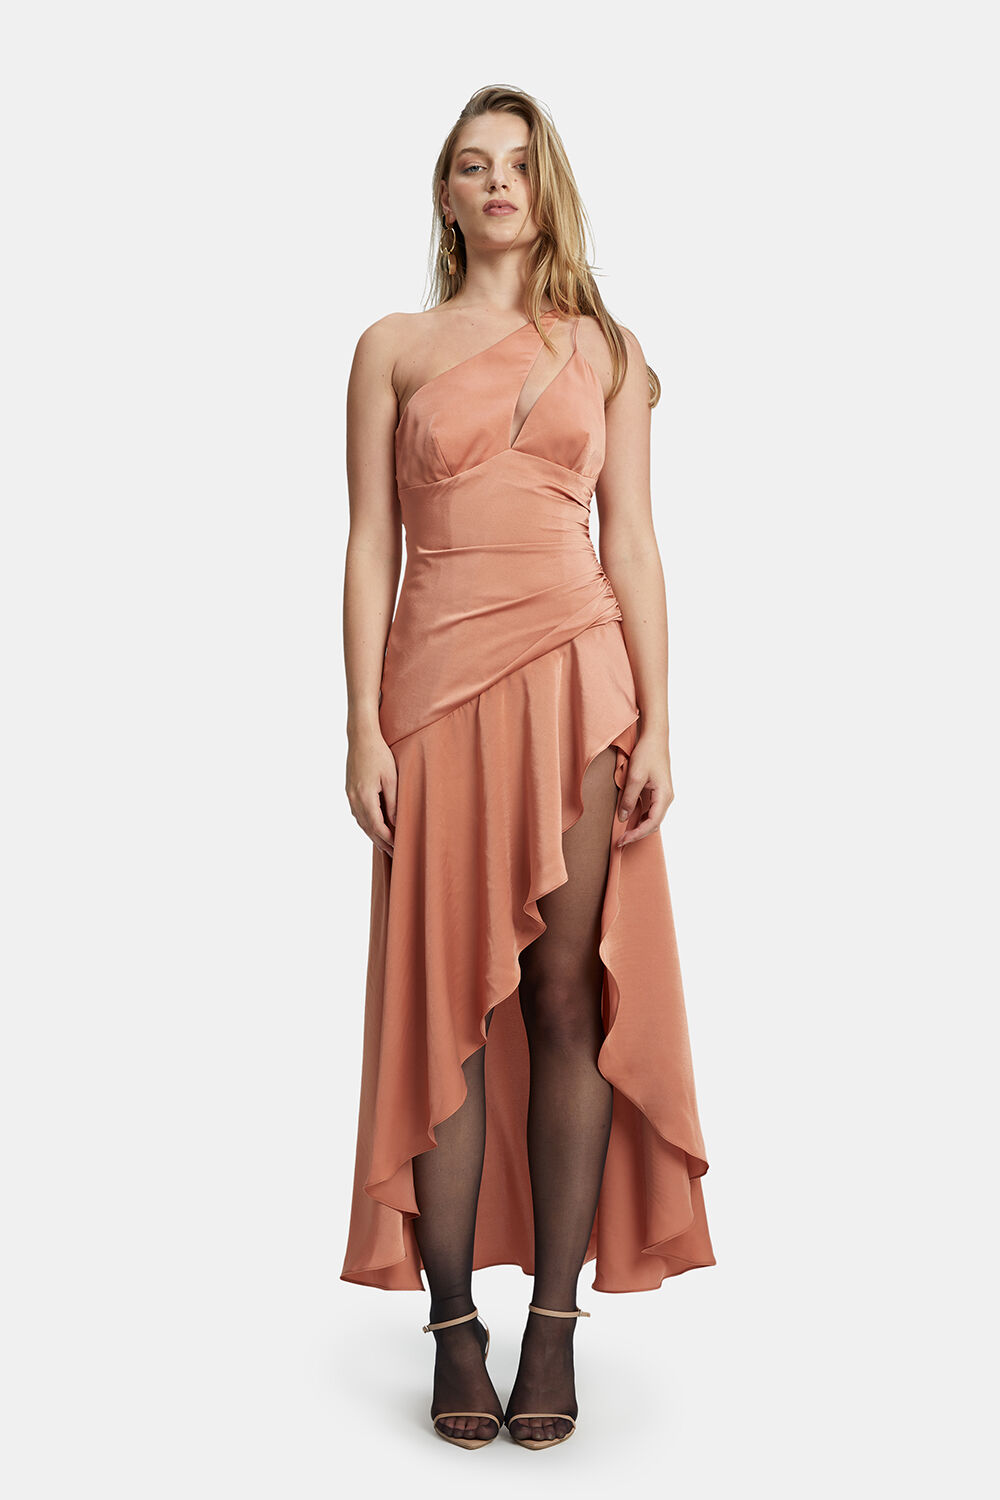 FAYE ONE SHOULDER MAXI DRESS in colour CORAL REEF